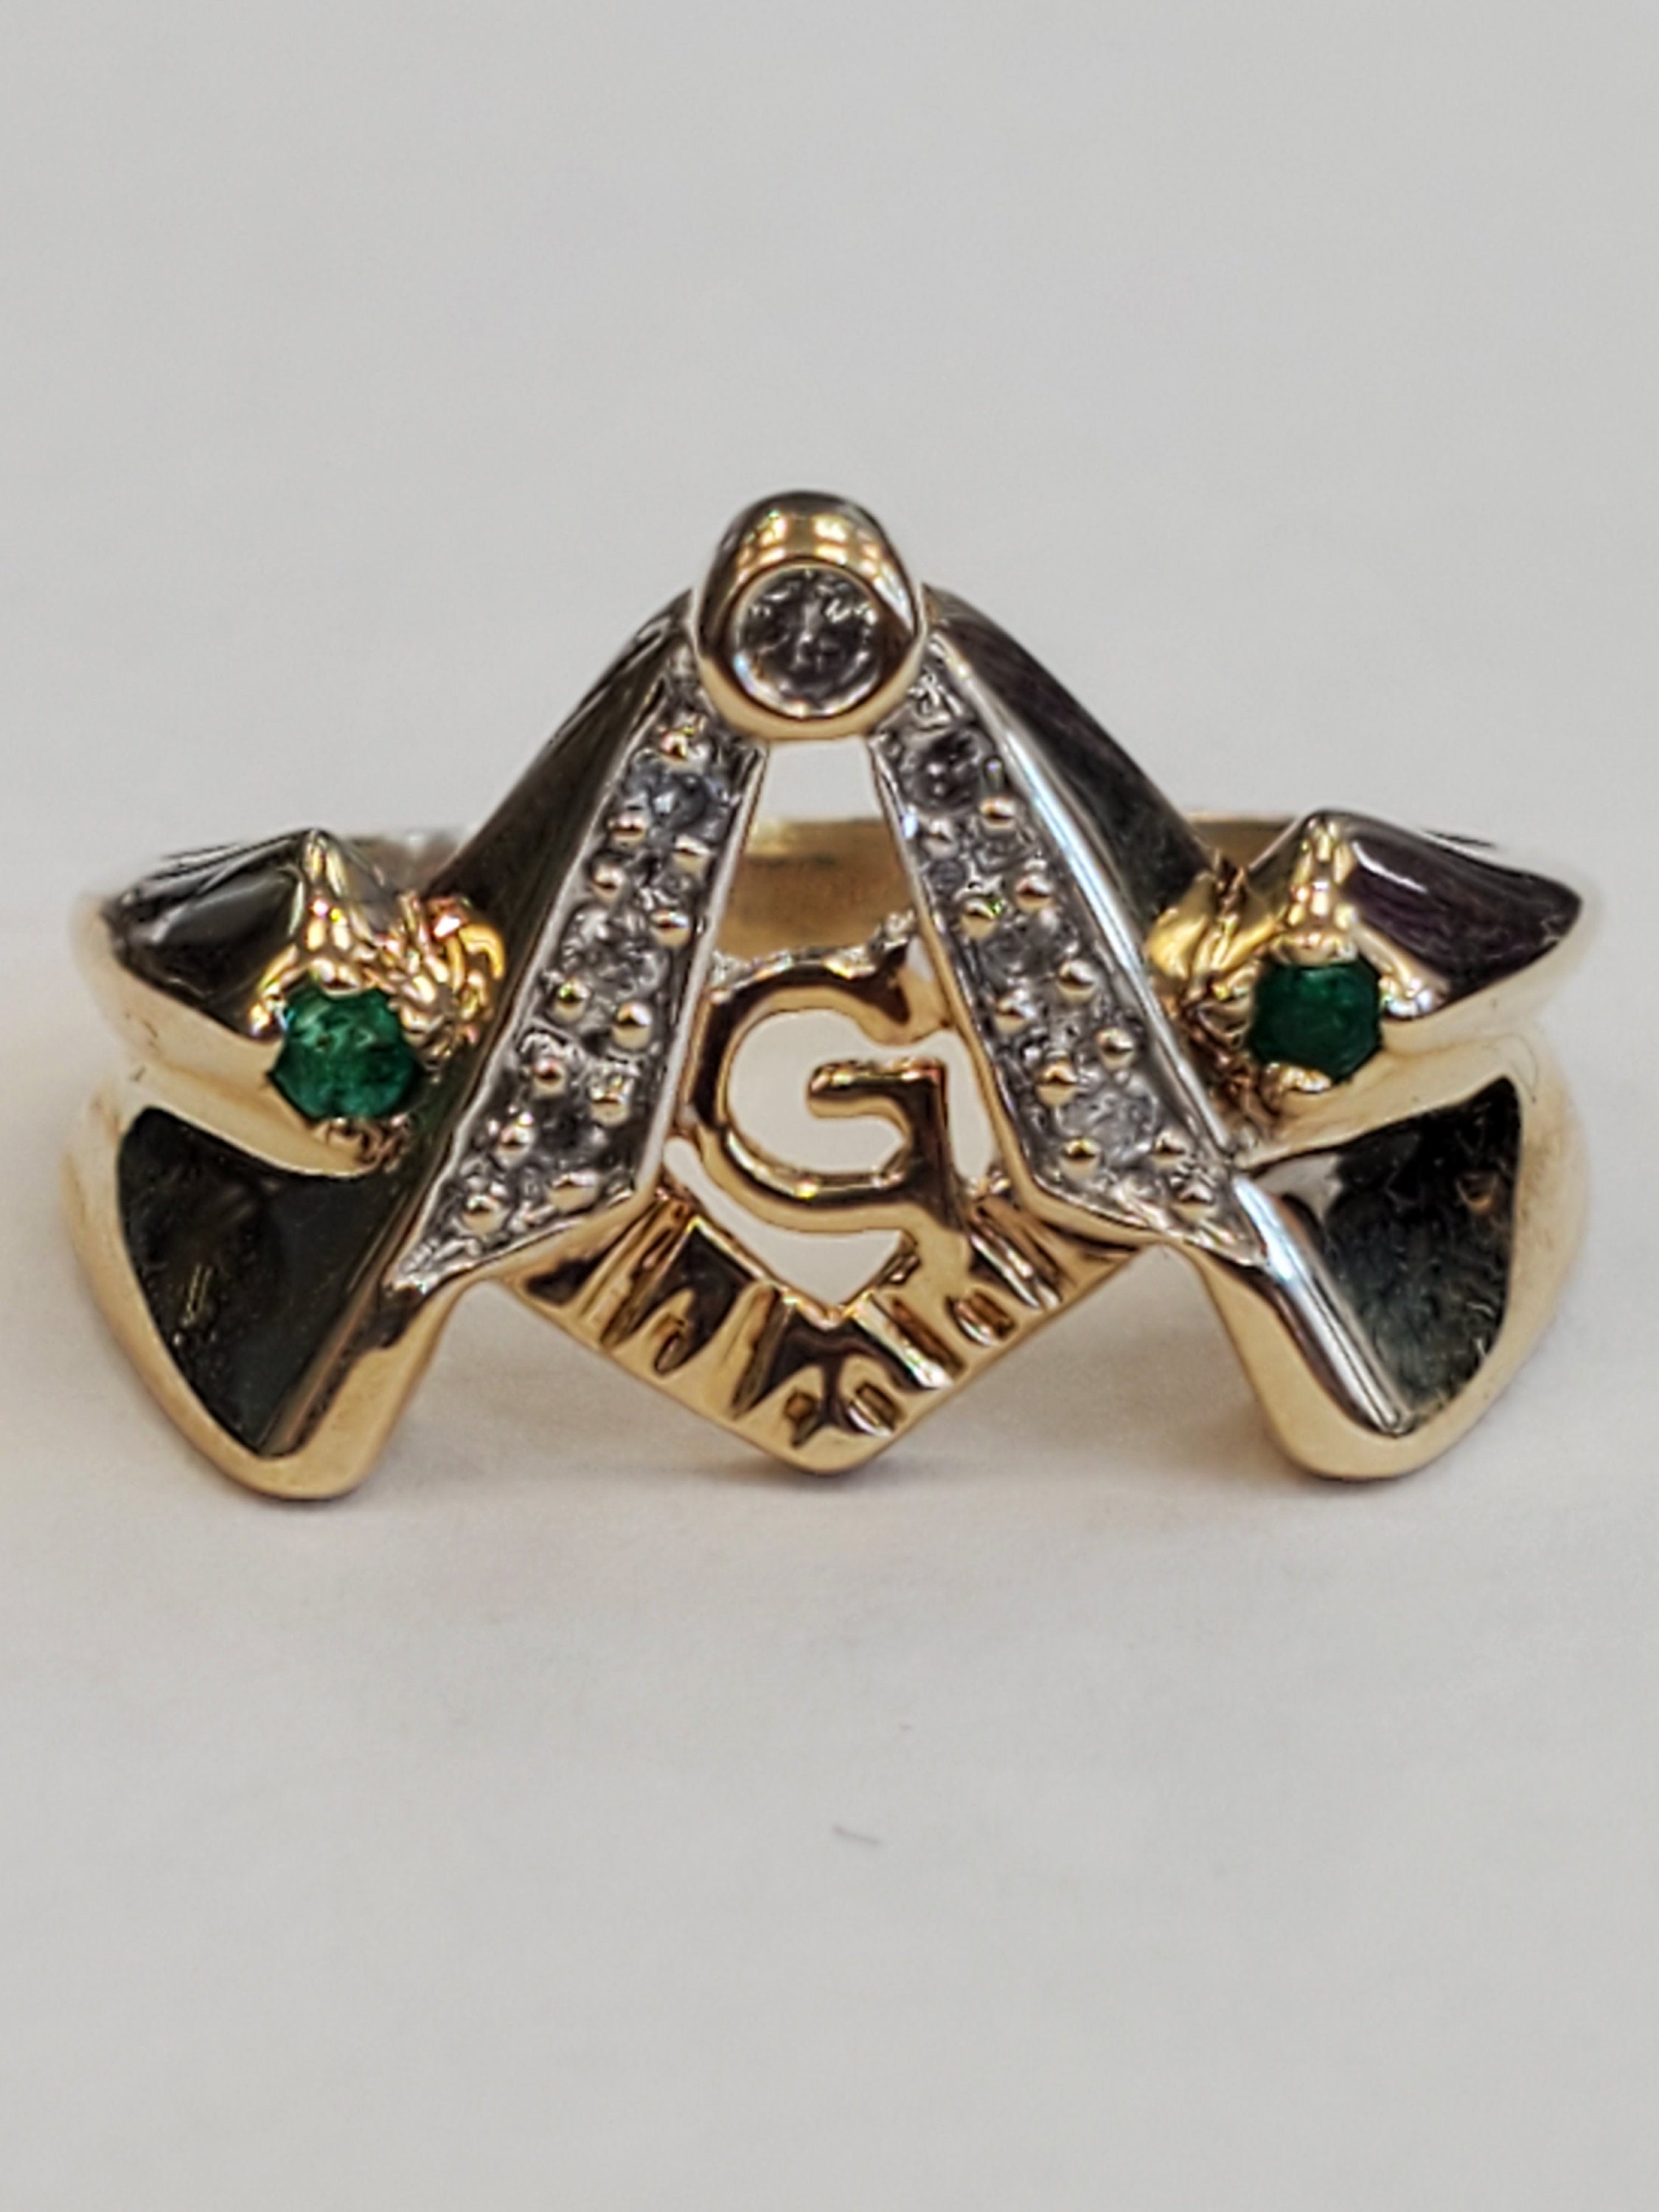 Product Image for Mason Masonic Emerald and Diamond Square and Compass Ring 10k Yellow Gold Size 9